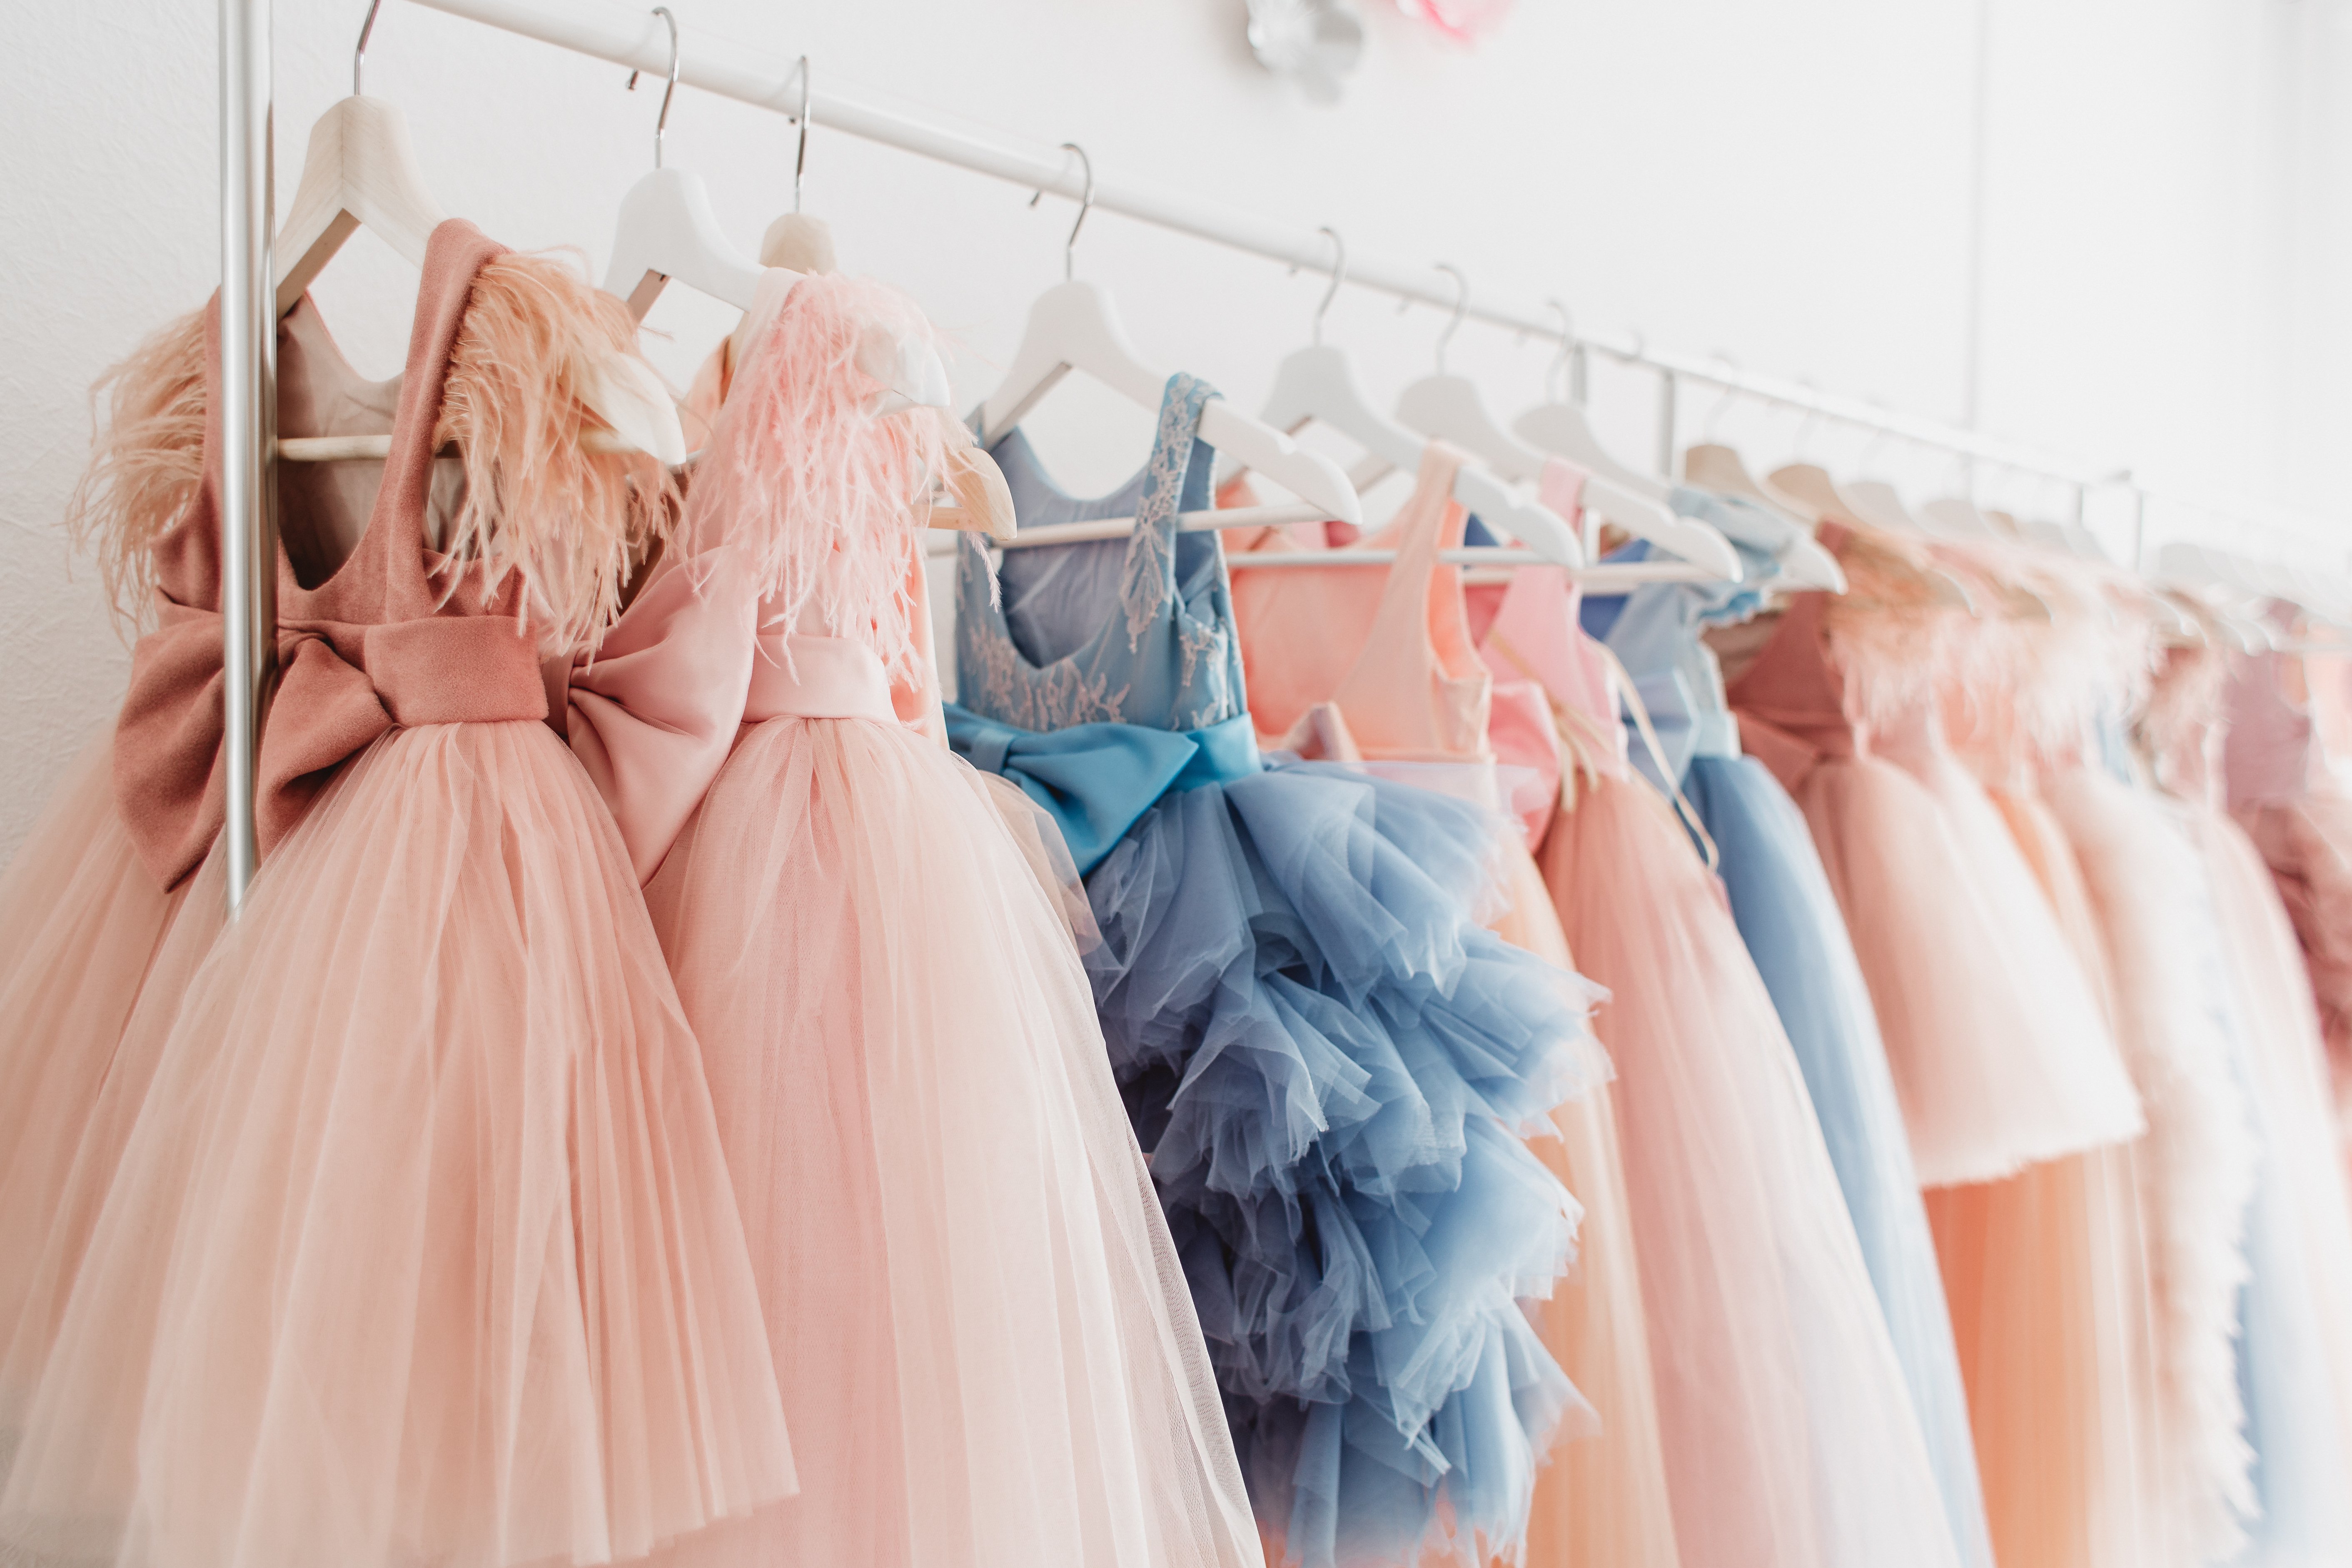 Madison looked at the price tags and knew there was no way she could afford the pretty dresses. | Source: Shutterstock